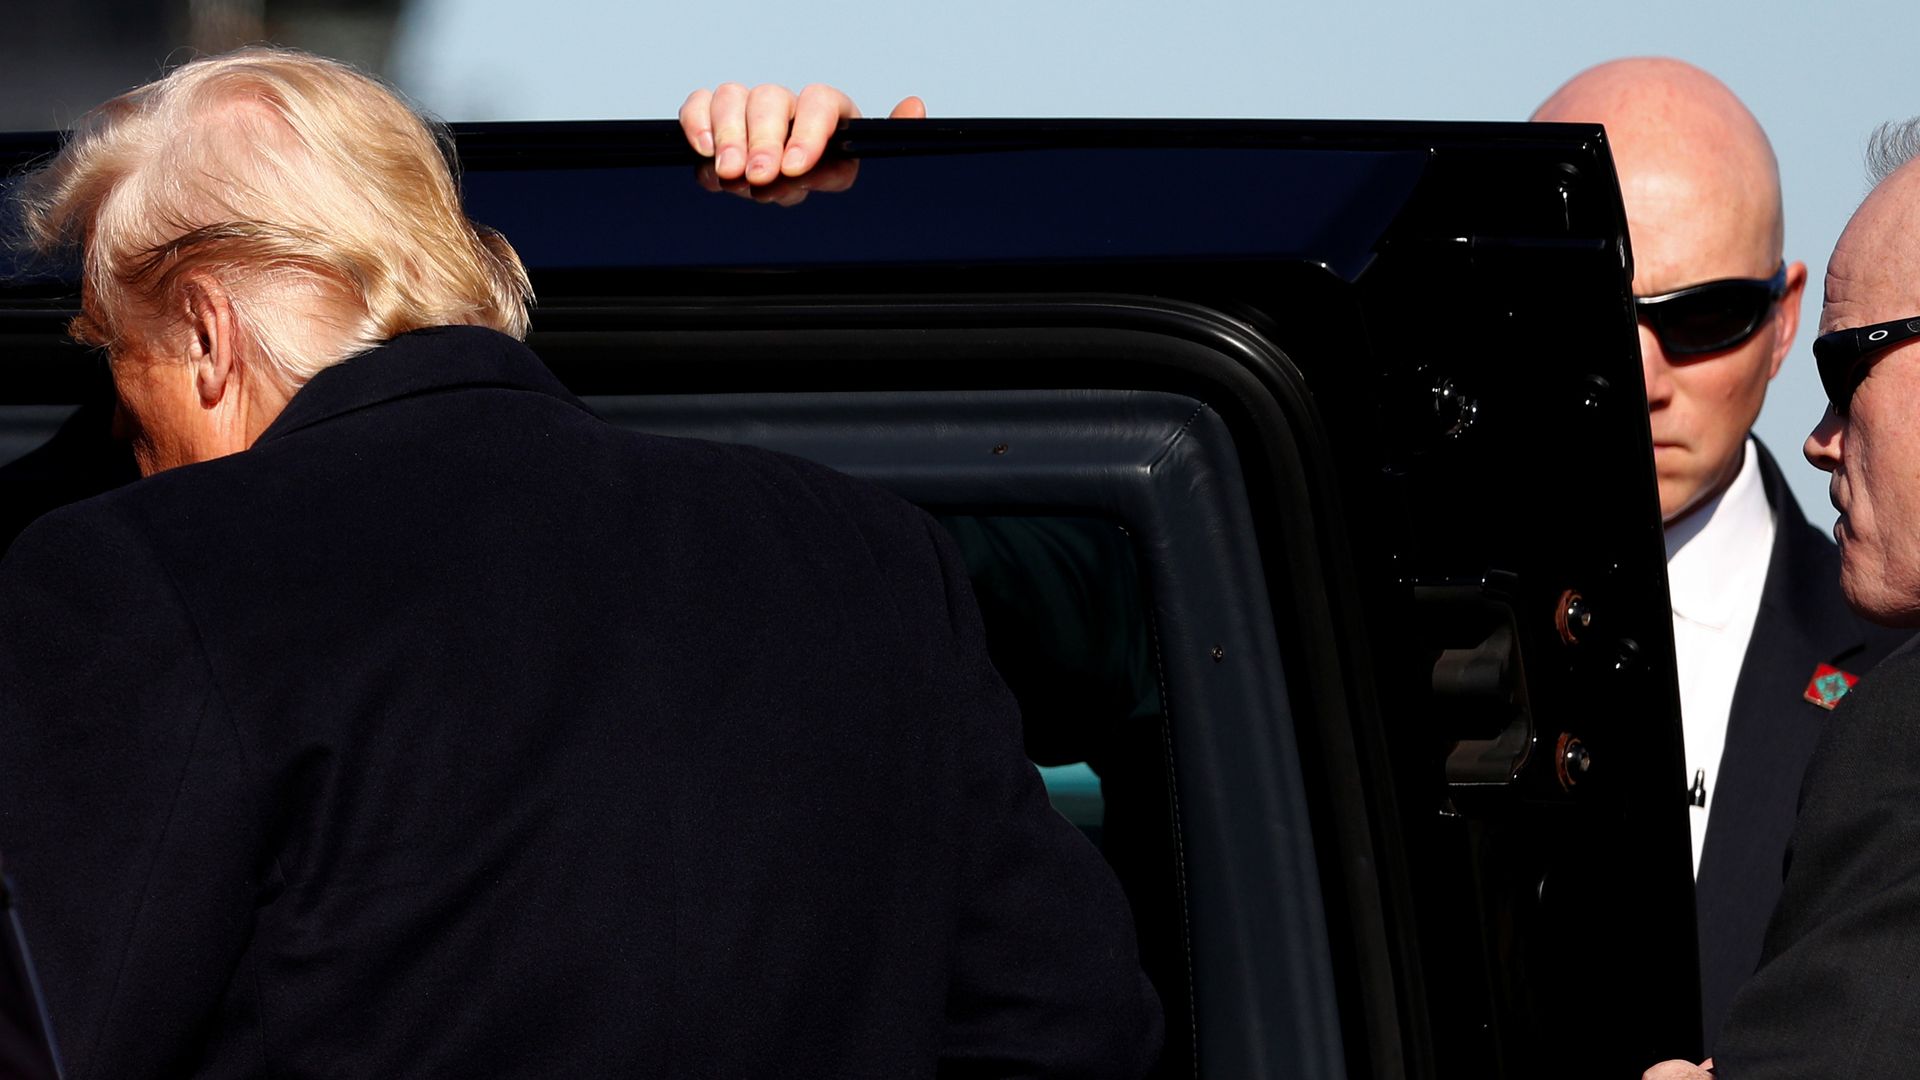 In this image, the back of Trump's head is visible as he gets into a black armored car.